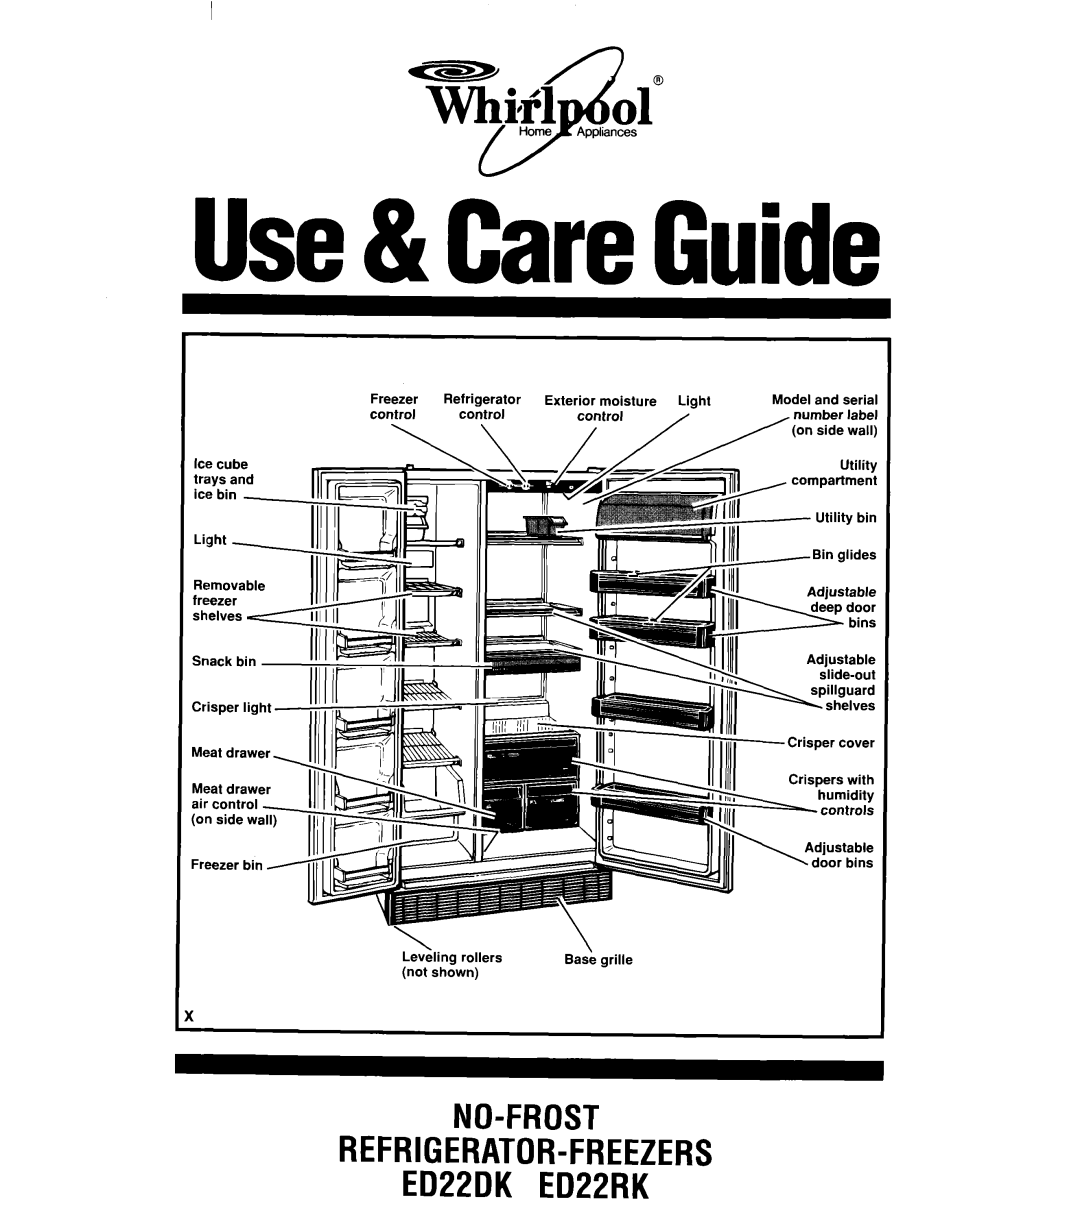 Whirlpool manual Use& CareGuide, No-Frost, REFRIGERATOR-FREEZERSED22DK ED22RK 